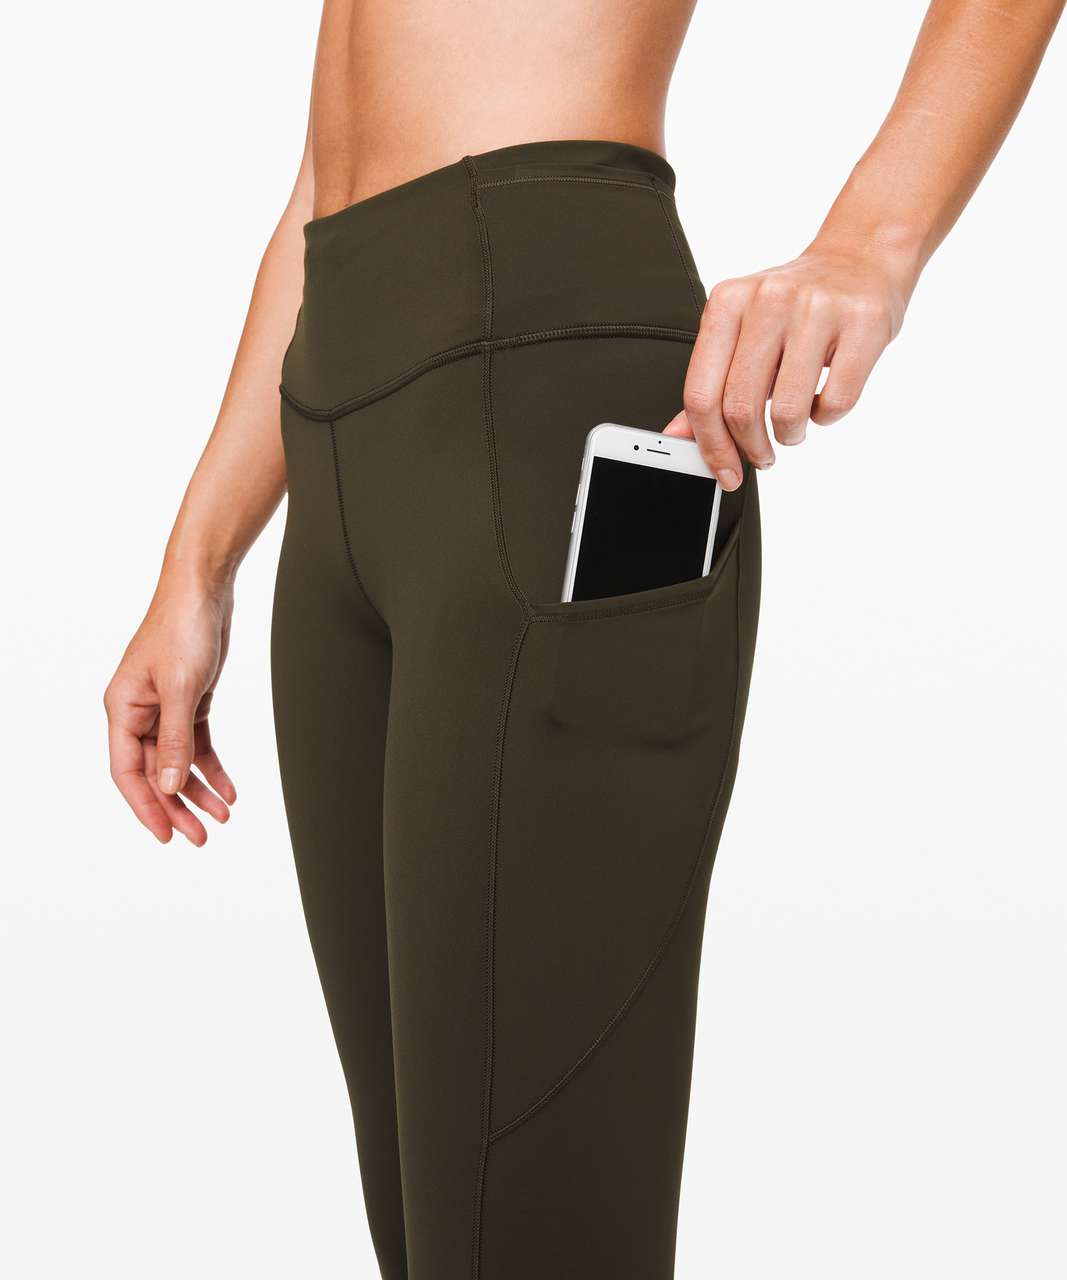 Lululemon Fast and Free High-Rise Crop II 23" *Non-Reflective - Dark Olive